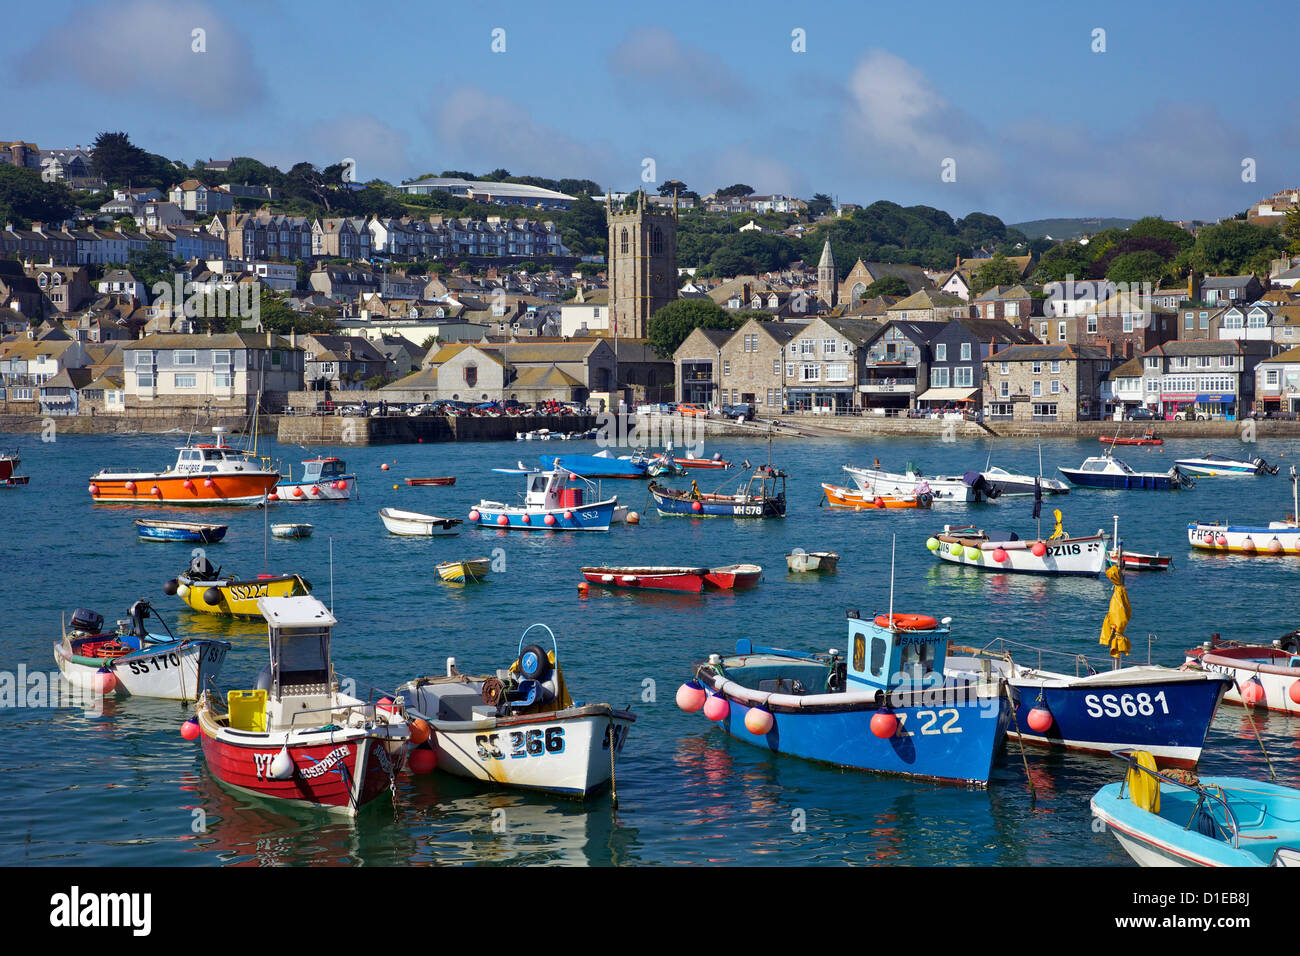 Summer sunshine on boats in the old harbour, St. Ives, Cornwall, England, United Kingdom, Europe Stock Photo